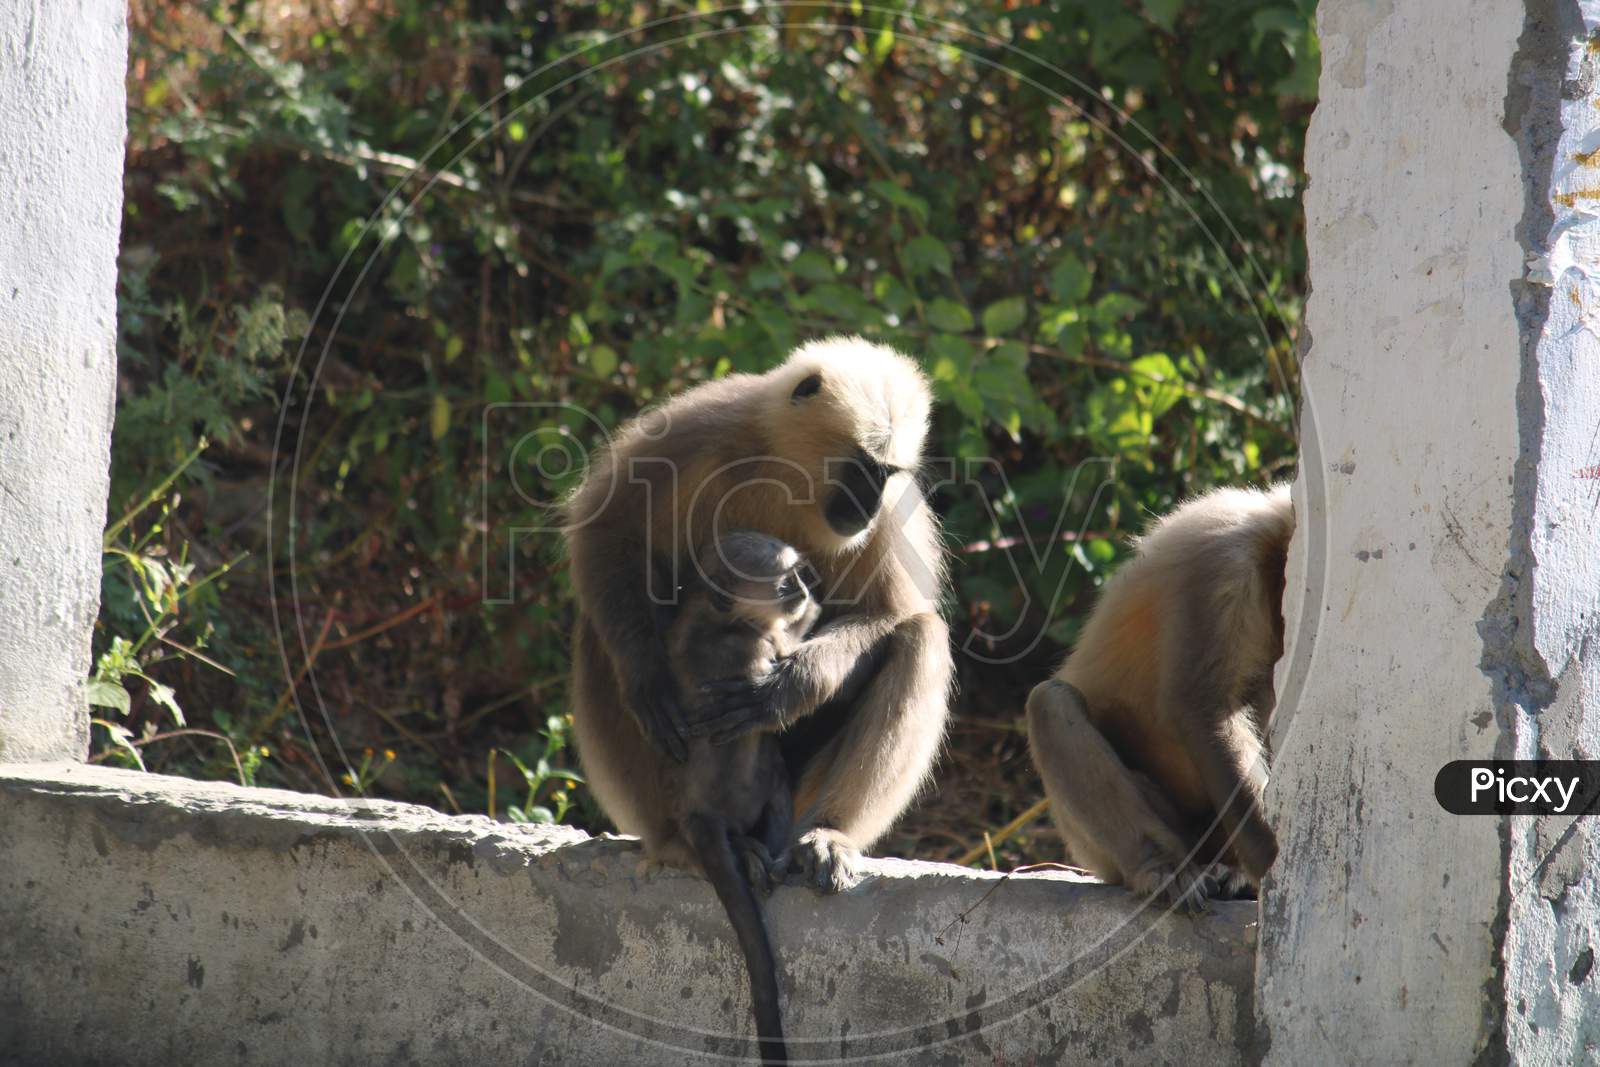 Baboon taking care of her baby